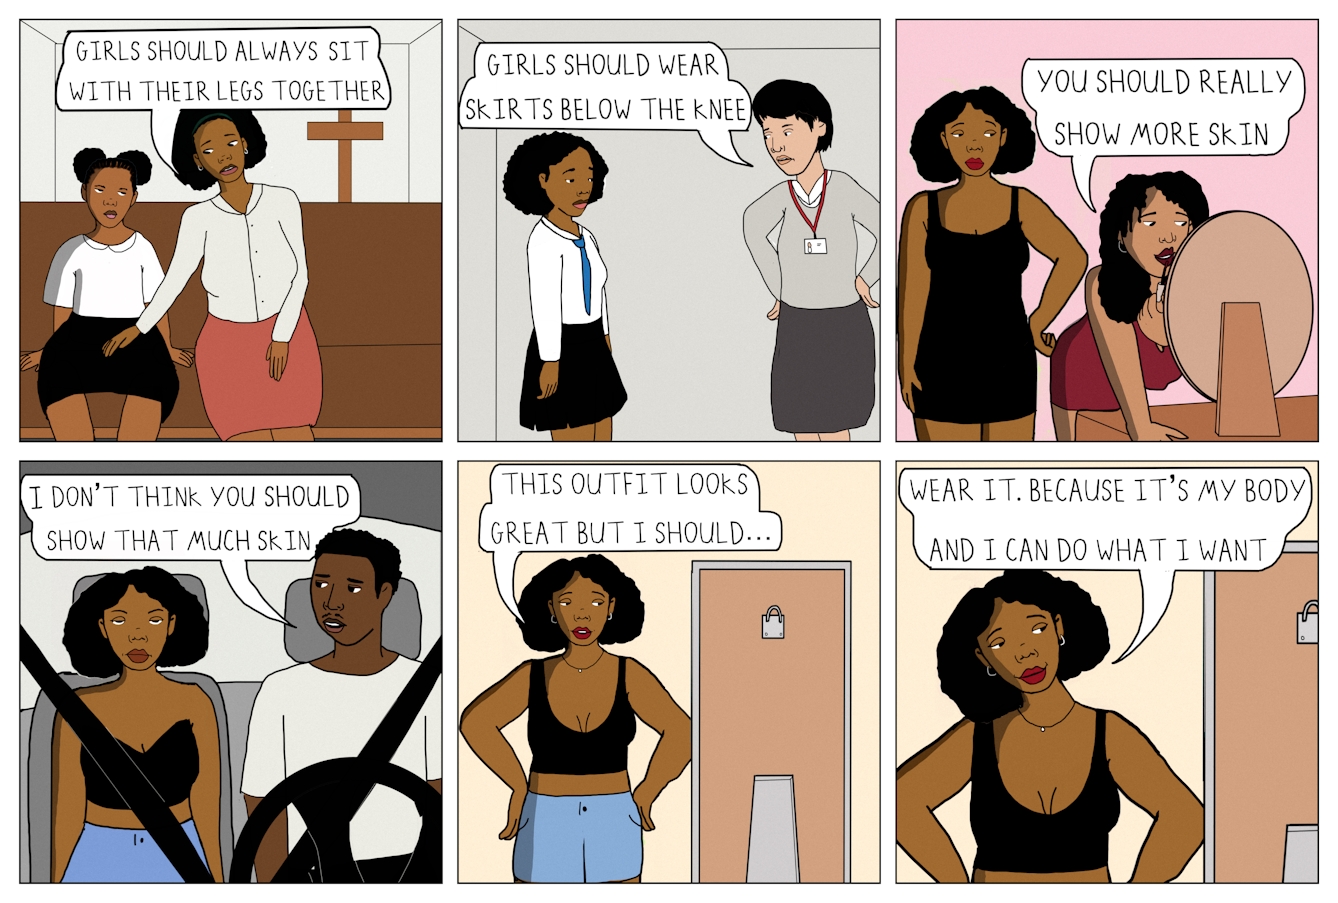 Six panel colour comic strip in a grid of 3 panels wide by 2 panels high.

The first panel shows a young girl and her mother sitting next to each other on a wooden pew in a church. There is a wooden Christian cross behind them. The young girl is wearing a white collared blouse and knee length black skirt, and the mother is wearing an off-white collared blouse and knee length pink skirt. The mother is leaning in slightly towards her daughter and looking at her, with her hand on her daughter’s left thigh. The young girl is looking up at her mother disgruntledly. The young girl’s legs are parted slightly, whilst her mother’s legs are held together. A speech bubble from the mother reads ‘Girls should always sit with their legs together’. 

The second panel shows the same girl, now slightly older and at school. She is wearing a white school shirt, blue tie, and black pleated skirt which ends two-thirds of the way down her thigh. She is standing facing a female school teacher who is wearing a staff lanyard, a grey sweater and a grey skirt that extends below the knee. The teacher is looking down at the girl with her hands on her hips. A speech bubble comes from her and reads ‘Girls should wear skirts below the knee’.

The third panel shows the same girl as an adolescent several years older. She is wearing a short, black bodycon dress which shows a hint of cleavage. Her hand is on her hip, and she is looking at her friend who is wearing a short red dress and leaning over a dressing table. She is looking into a mirror and applying lipstick. A speech bubble from her reads ‘You should really show more skin’

The fourth panel shows the same girl sat in the passenger seat of a car with a young man who looks roughly the same age as her sat in the driver’s seat. She is wearing a black strapless bandeau crop top which is showing some of the girl’s cleavage and midriff. The girl is sat upright and is rolling her eyes frustratedly. The young man is wearing a white t-shirt and is looking over at the girl. A speech bubble comes from him and reads ‘I don’t think you should show that much skin’. 

The fifth panel shows the same girl stood in front of a full length mirror with her hands on her hips. She is wearing red lipstick, blue shorts and a low cut black crop top which shows her cleavage and midriff. A speech bubble from her reads ‘This outfit looks great but I should…’ 

The sixth panel shows the same scene. The girls’ hands remain on her hips, but her head is tilted slightly to one side and she is smiling slightly whilst looking in the mirror. A speech bubble from her reads ‘Wear it. Because it’s my body and I can do what I want’. 